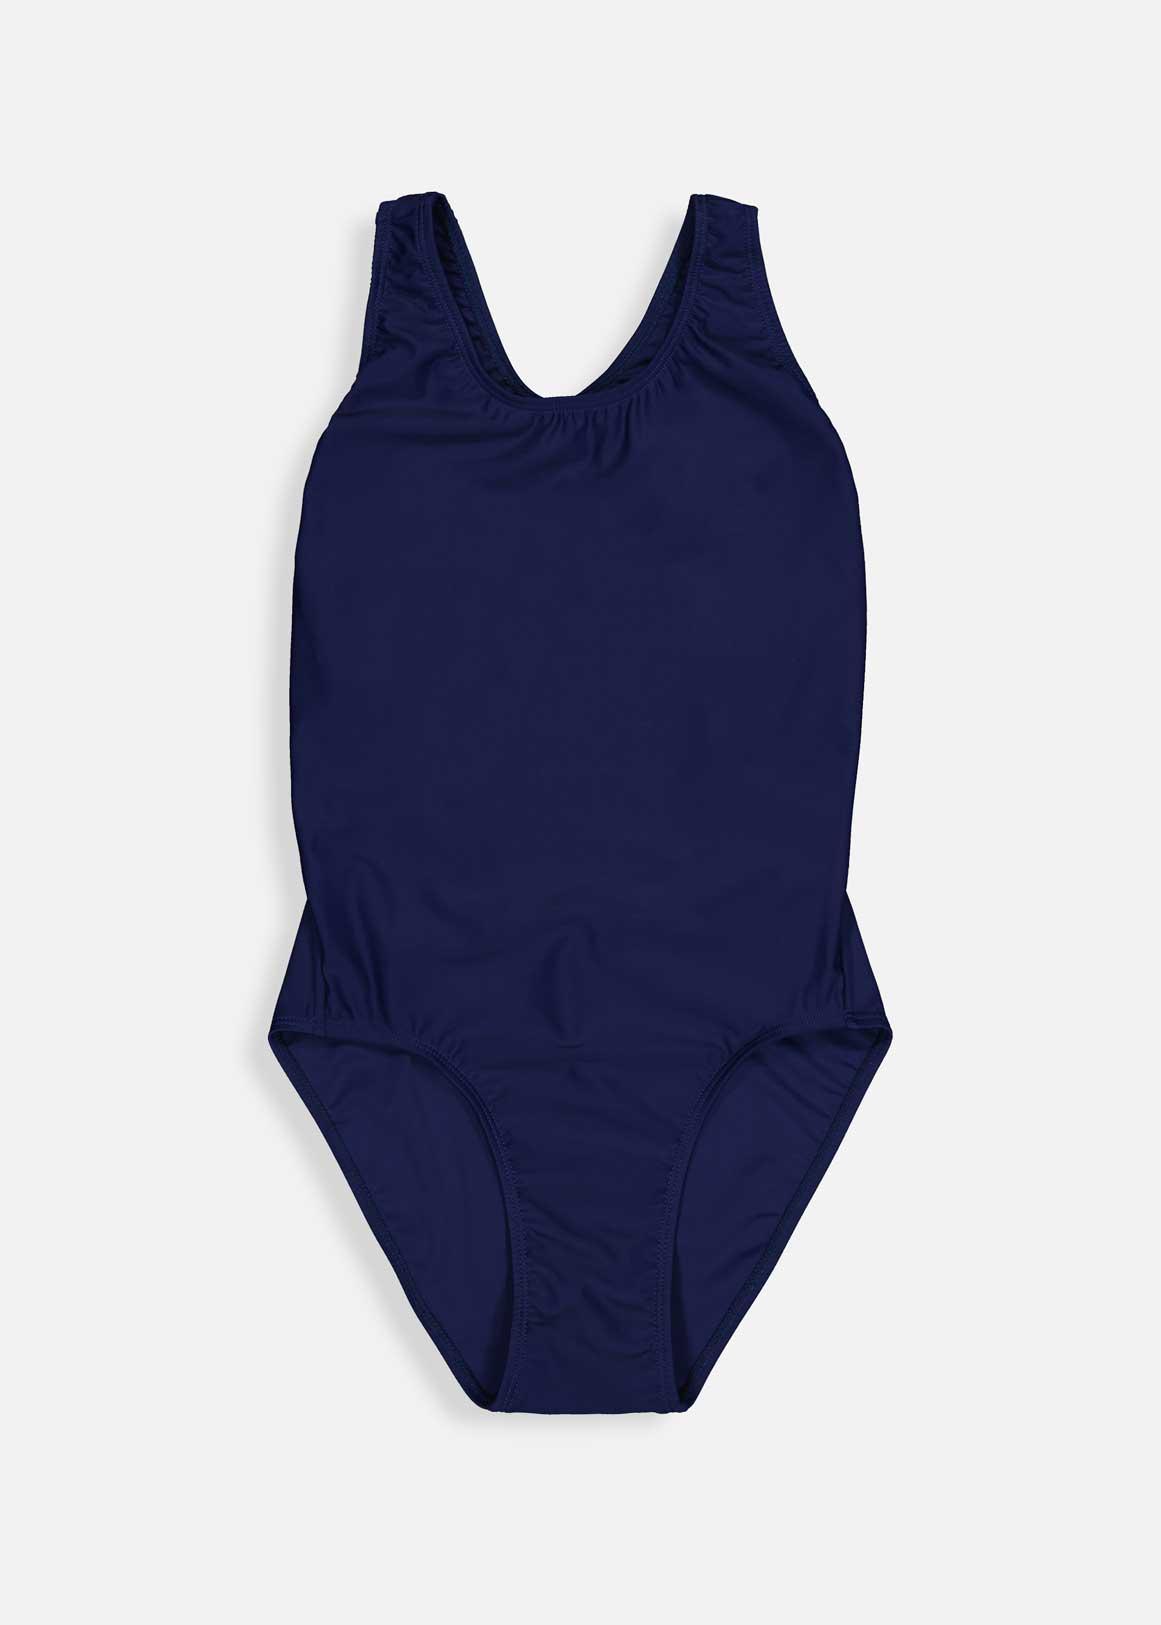 The One-Piece Swimsuits You Need For Summer! - Haute Off The Rack